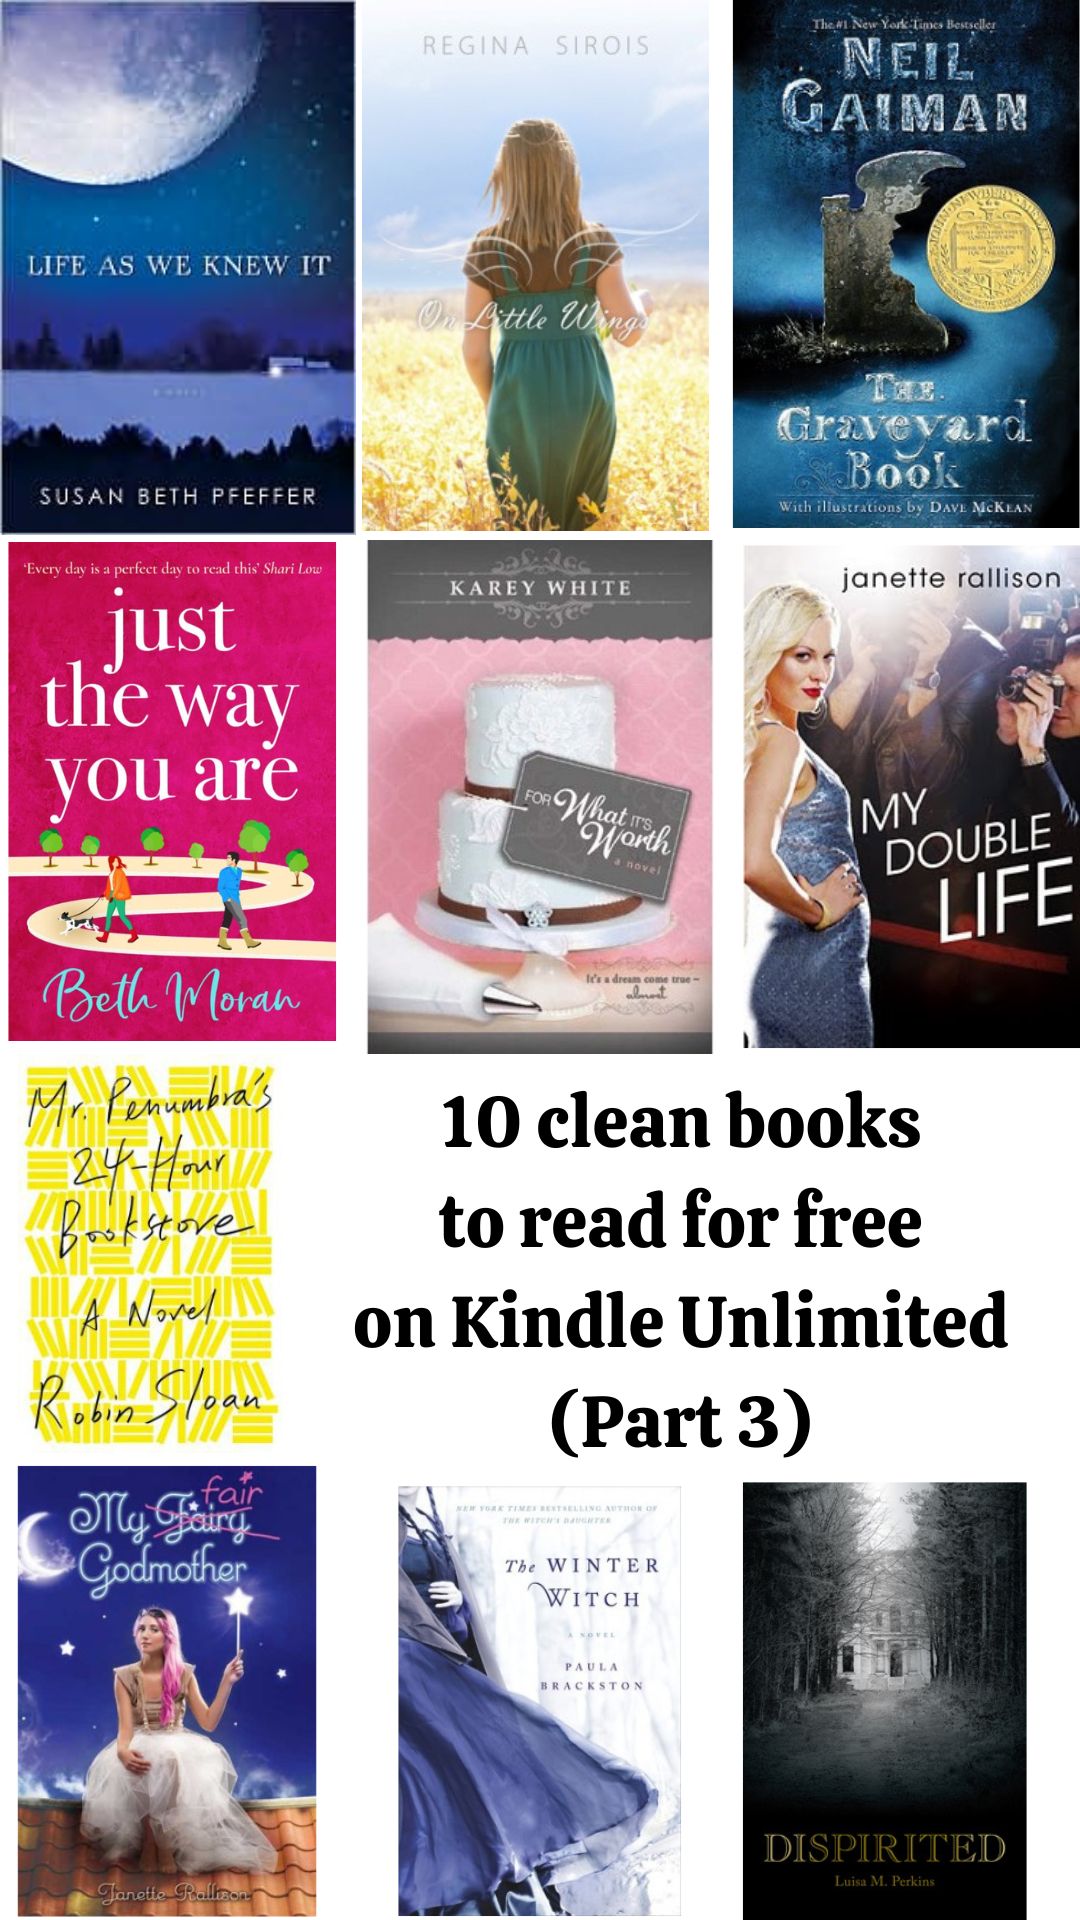 10 clean books free on Kindle